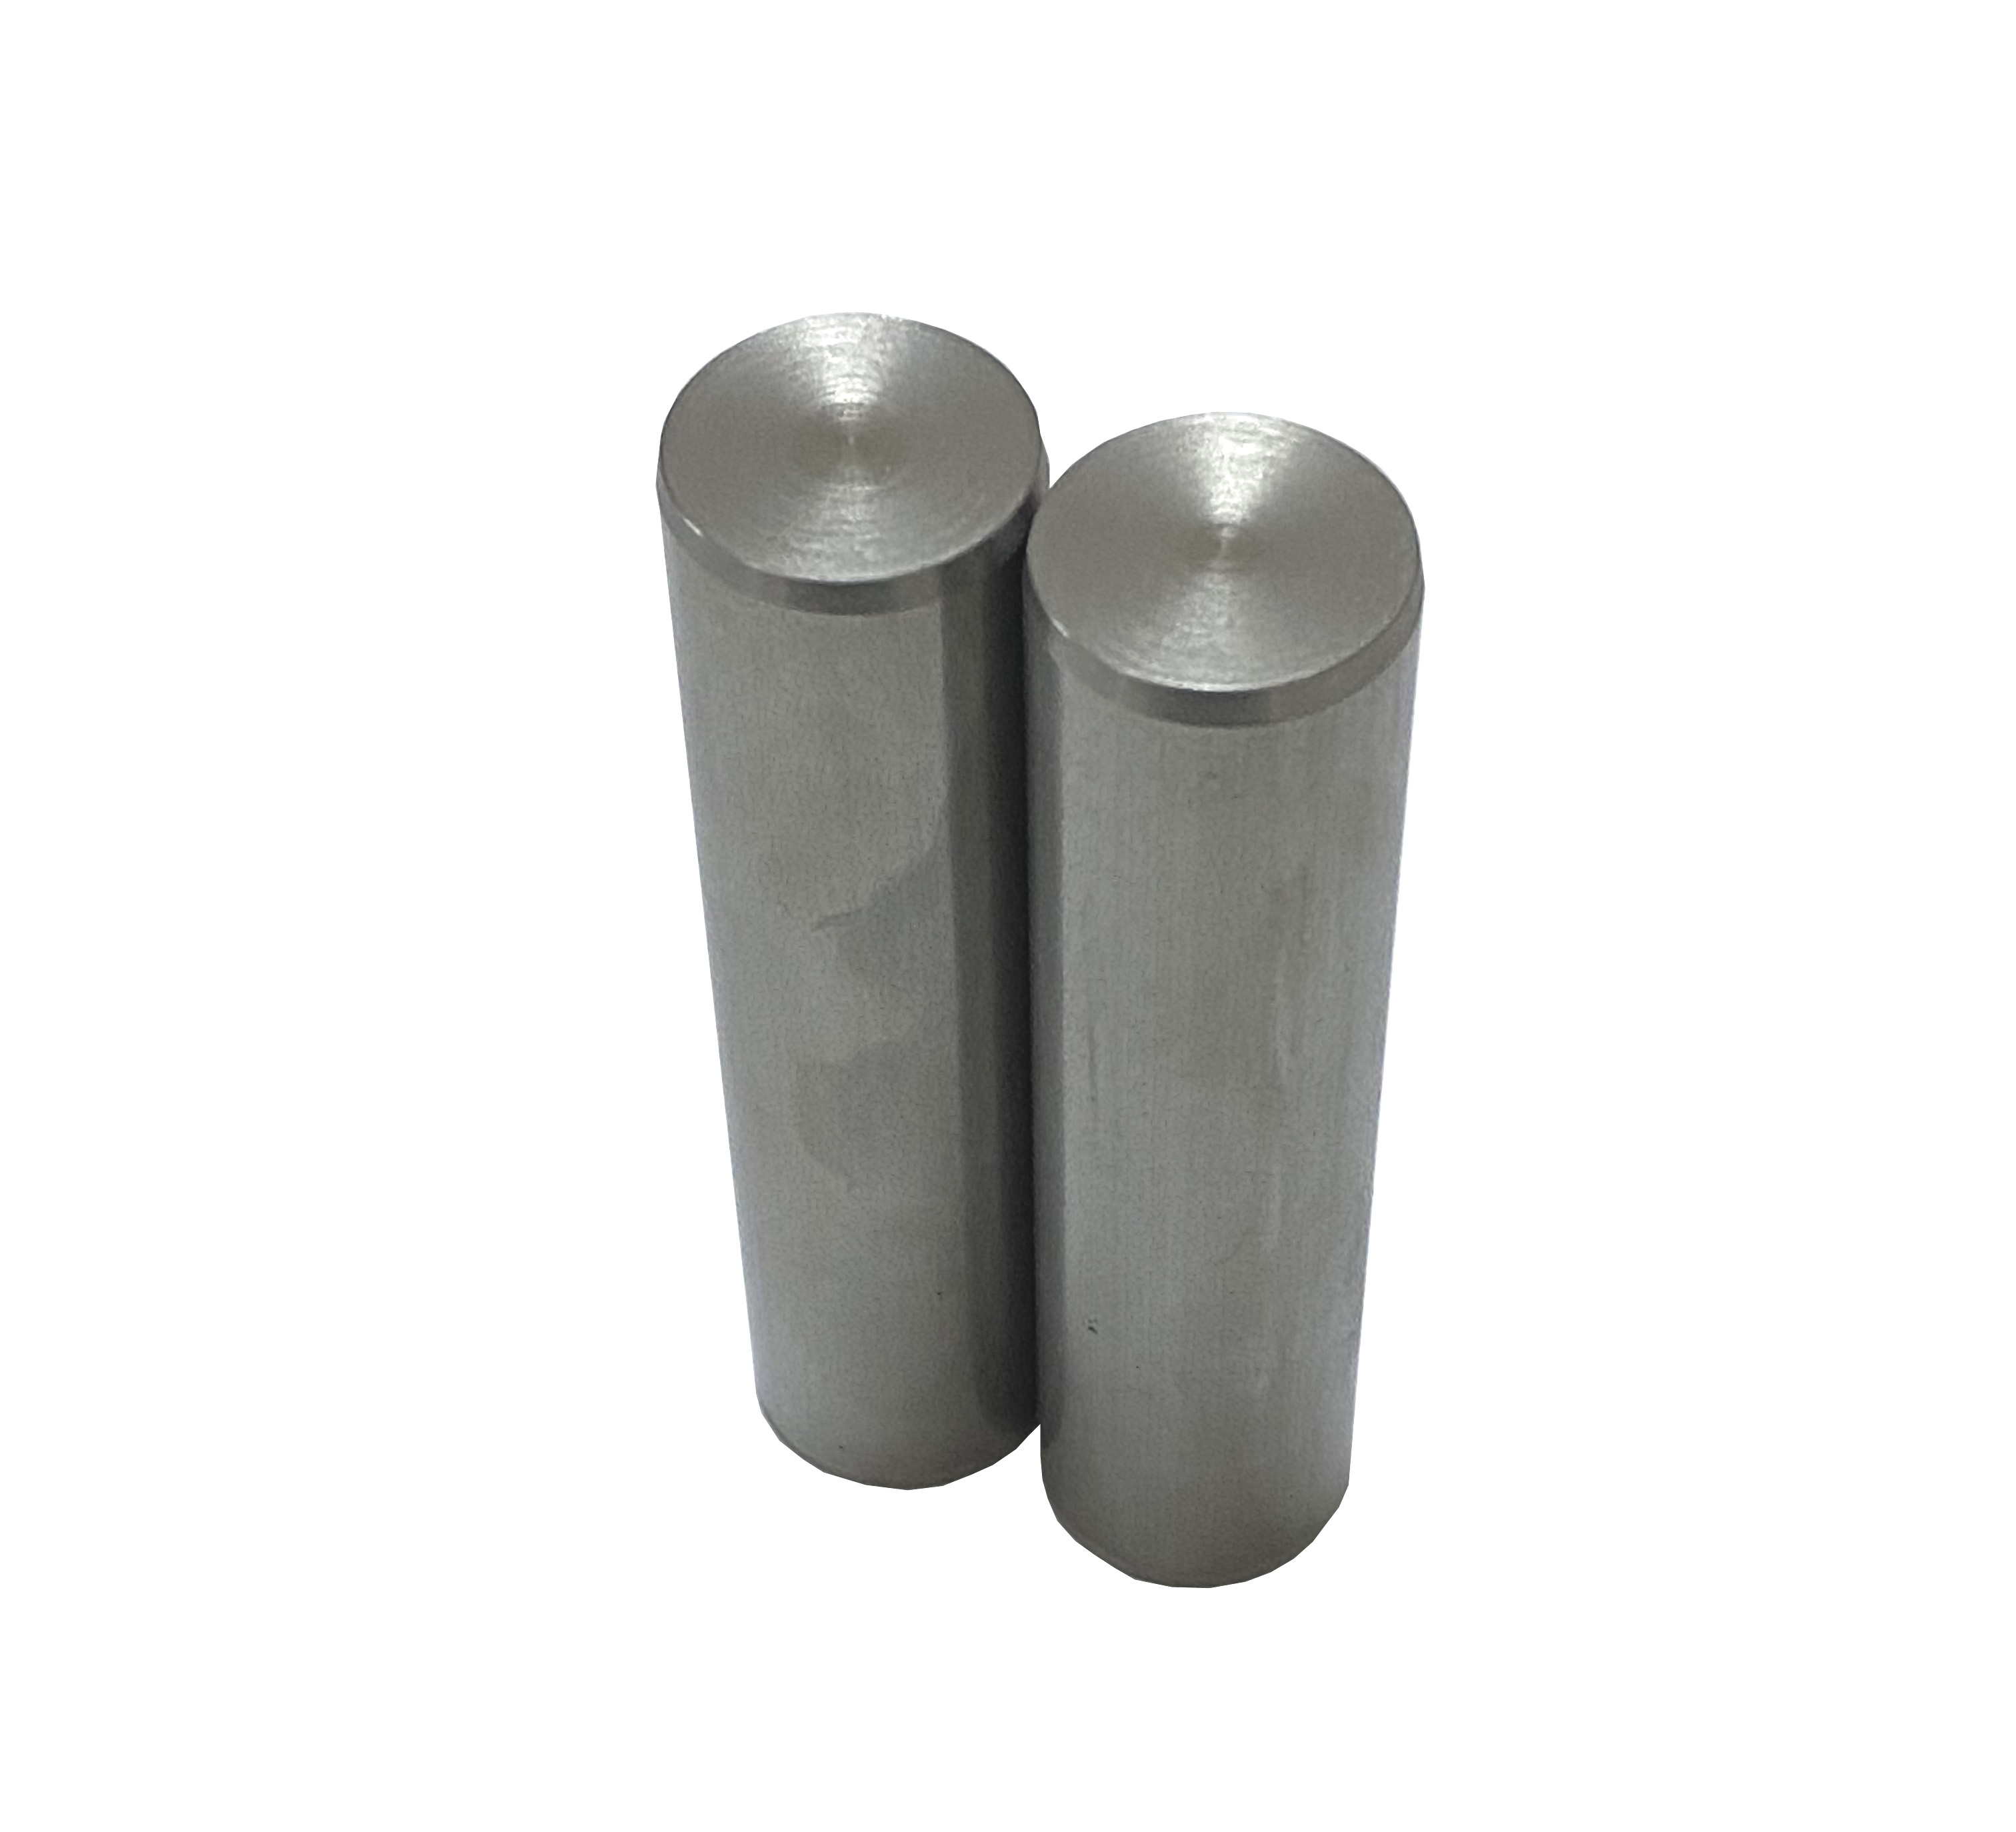 CNC Stainless Steel Shaft Pin Adapter Rod CNC Machining Parts